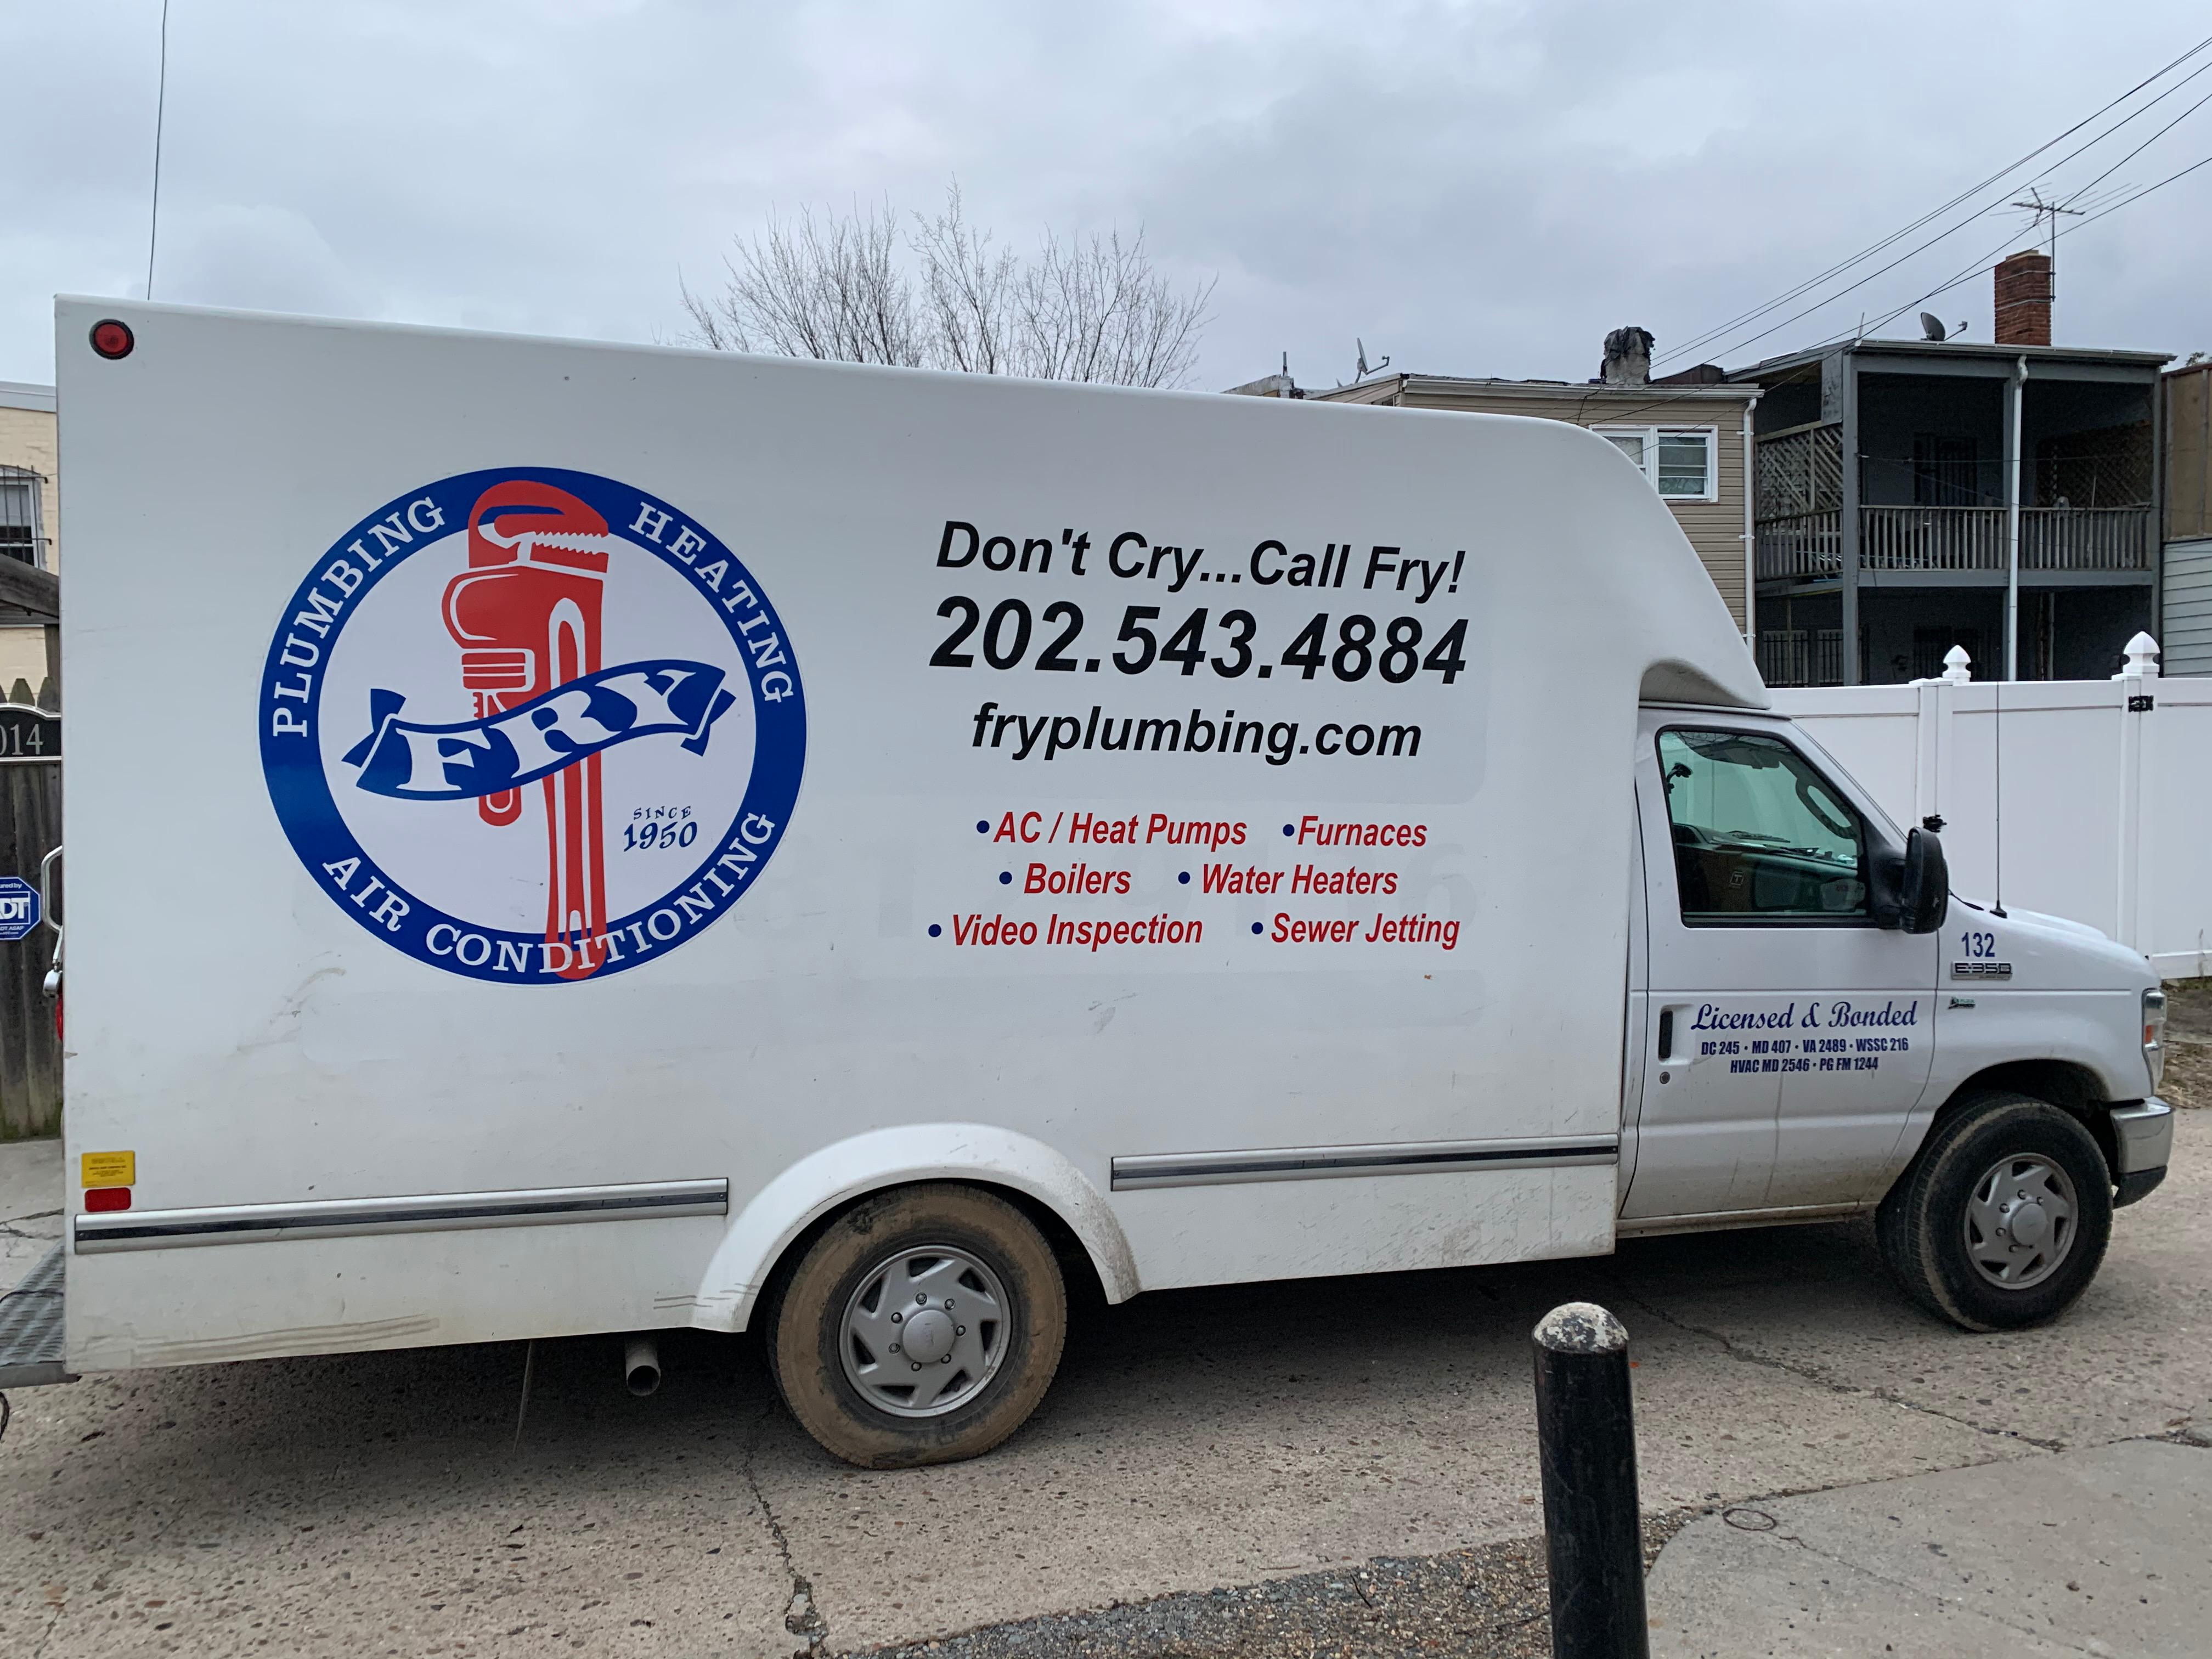 Fry plumbing and heating truck 2